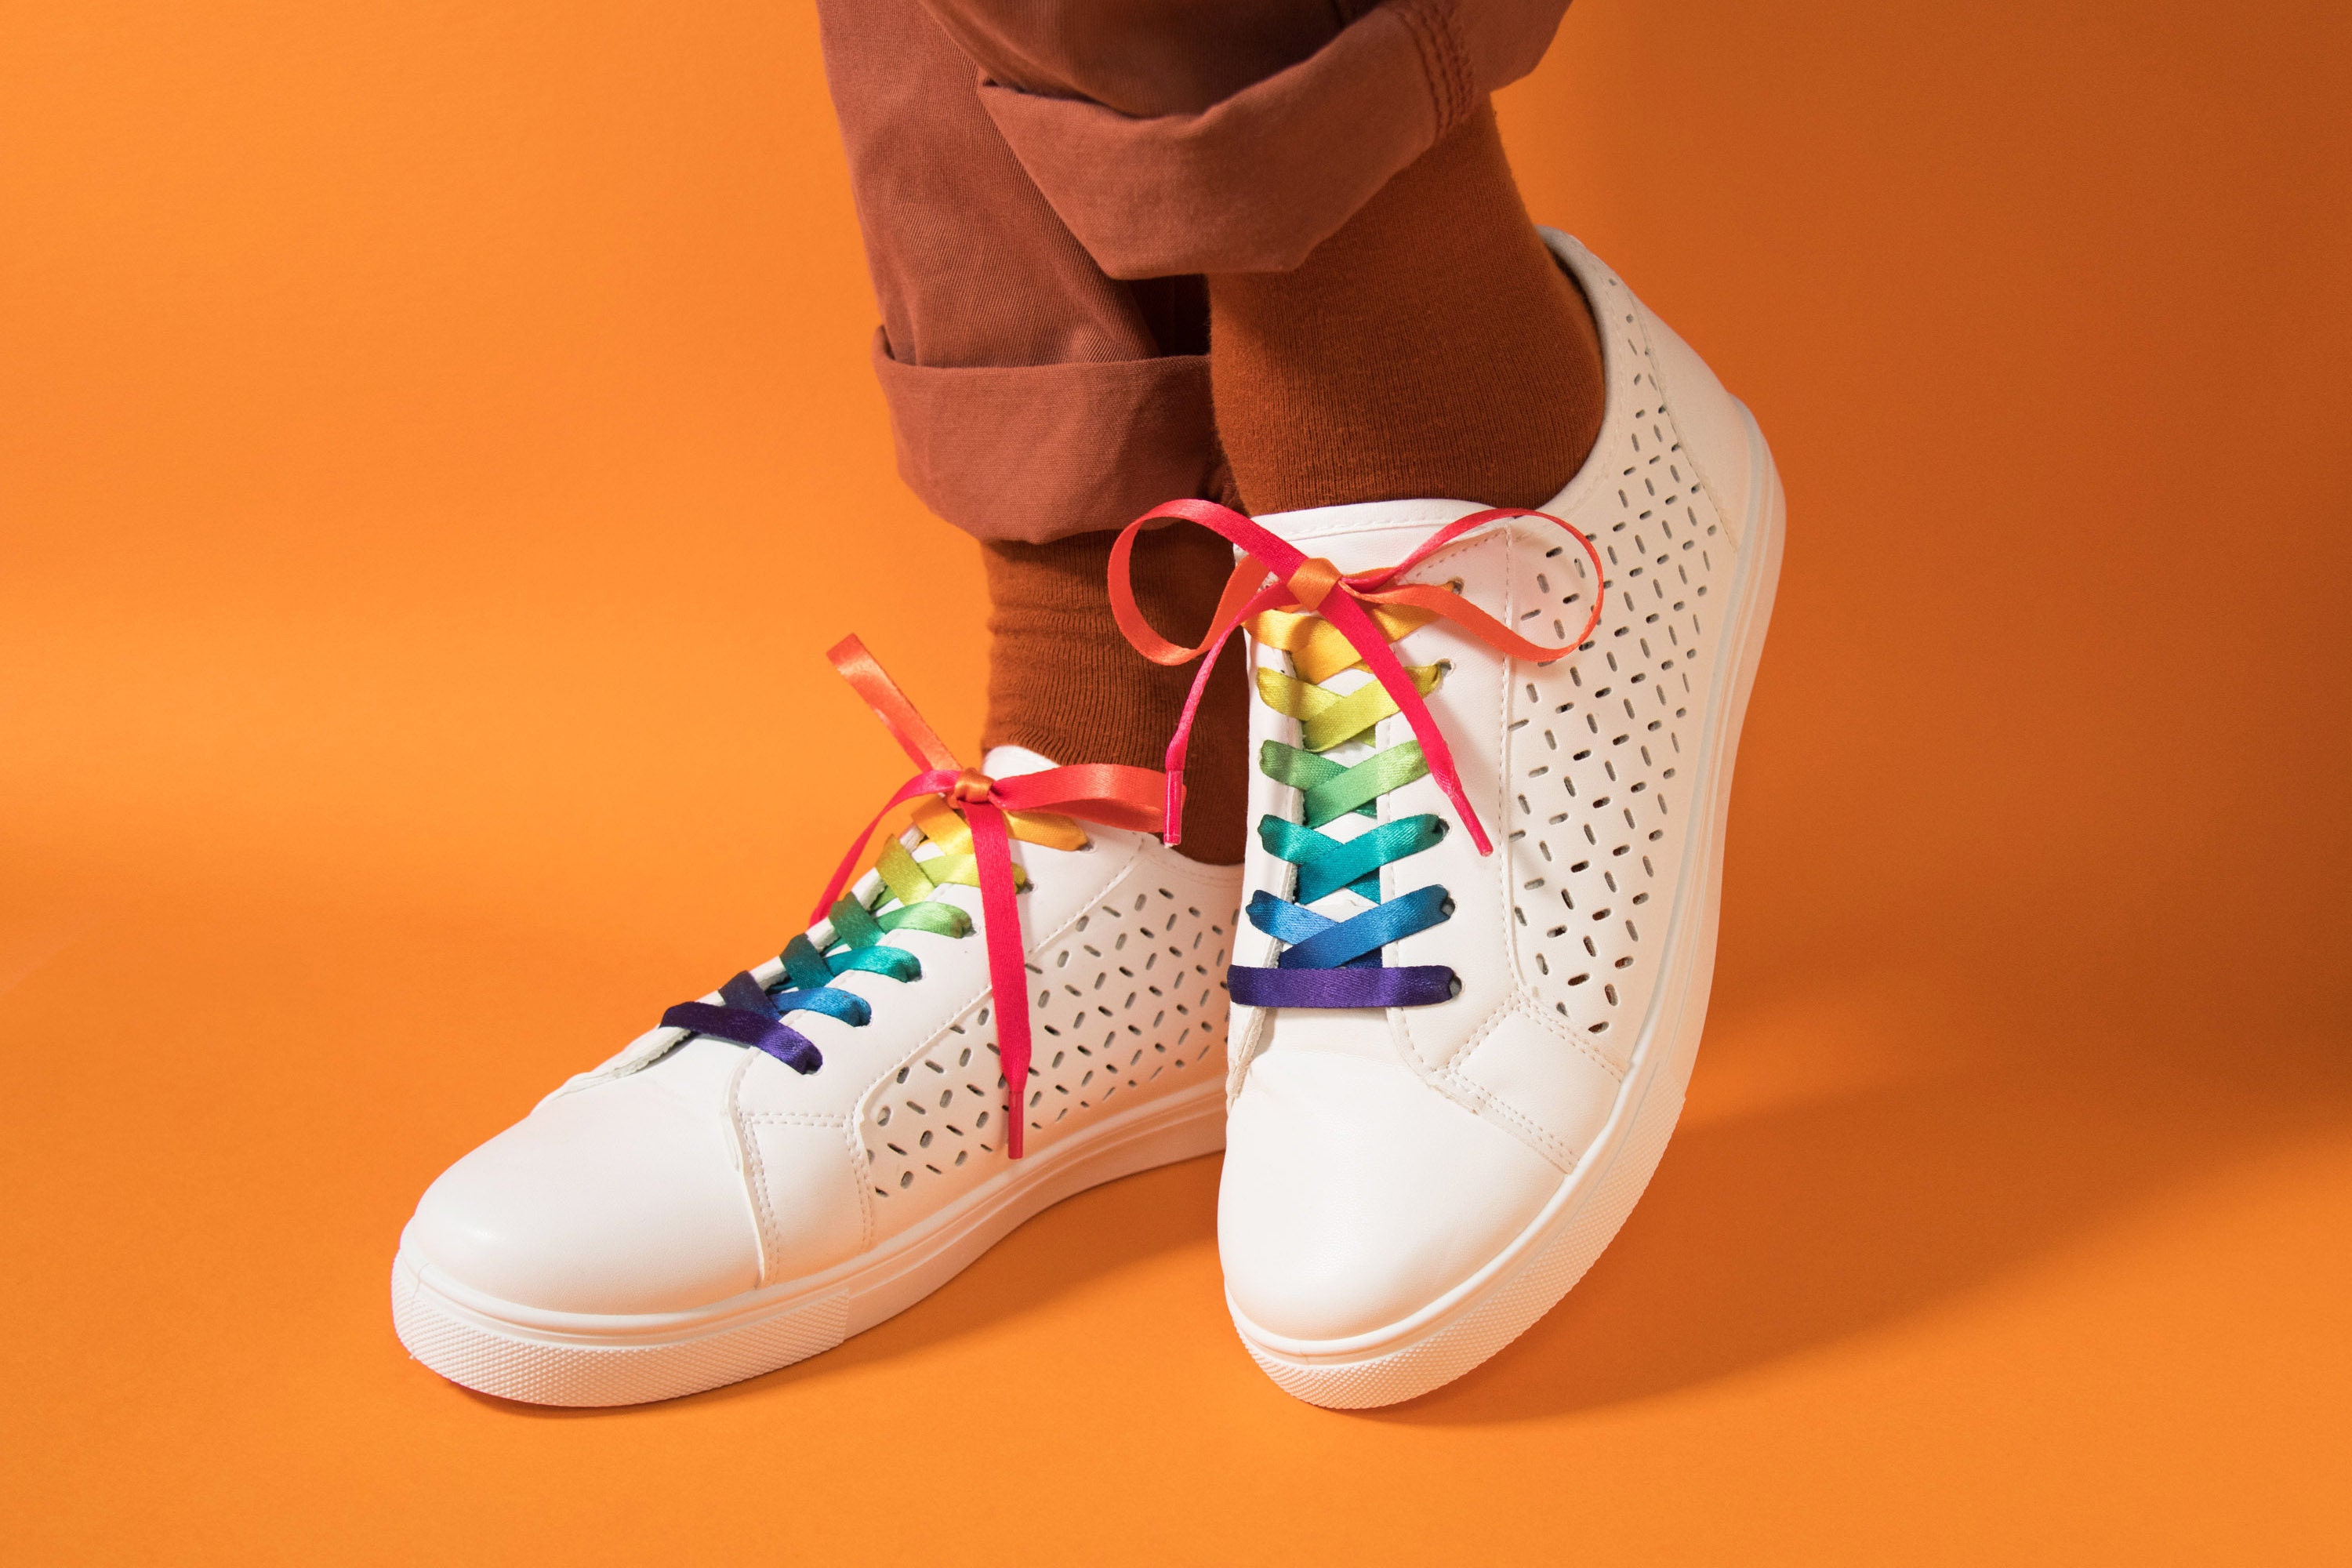 Rainbow Shoelaces Sport Queer LGBT Gay Football Team Player